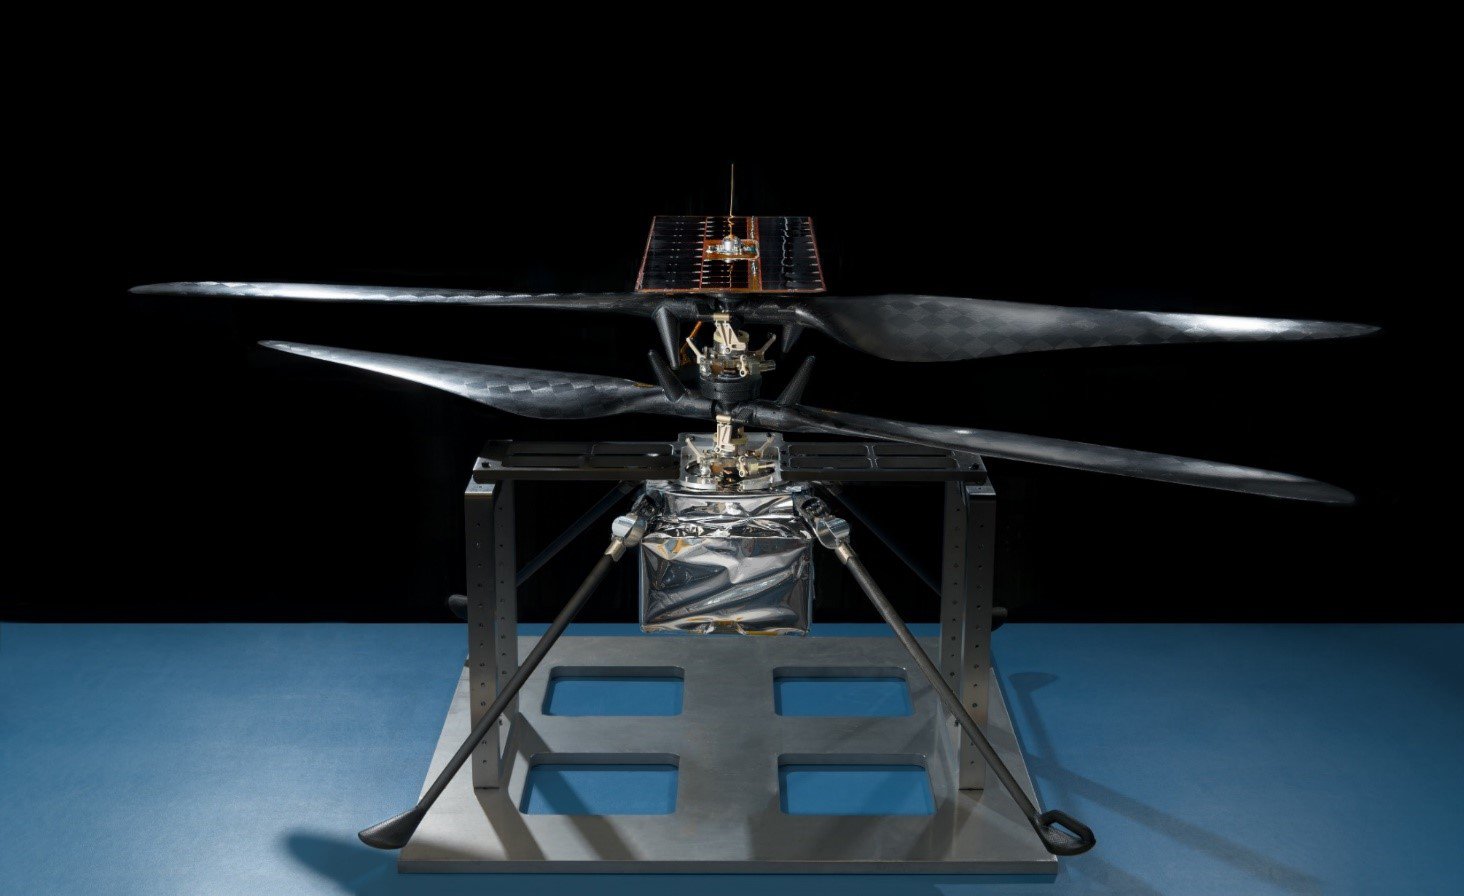 Flight Model image of Ingenuity before delivery to Kennedy Space Center for Launch.